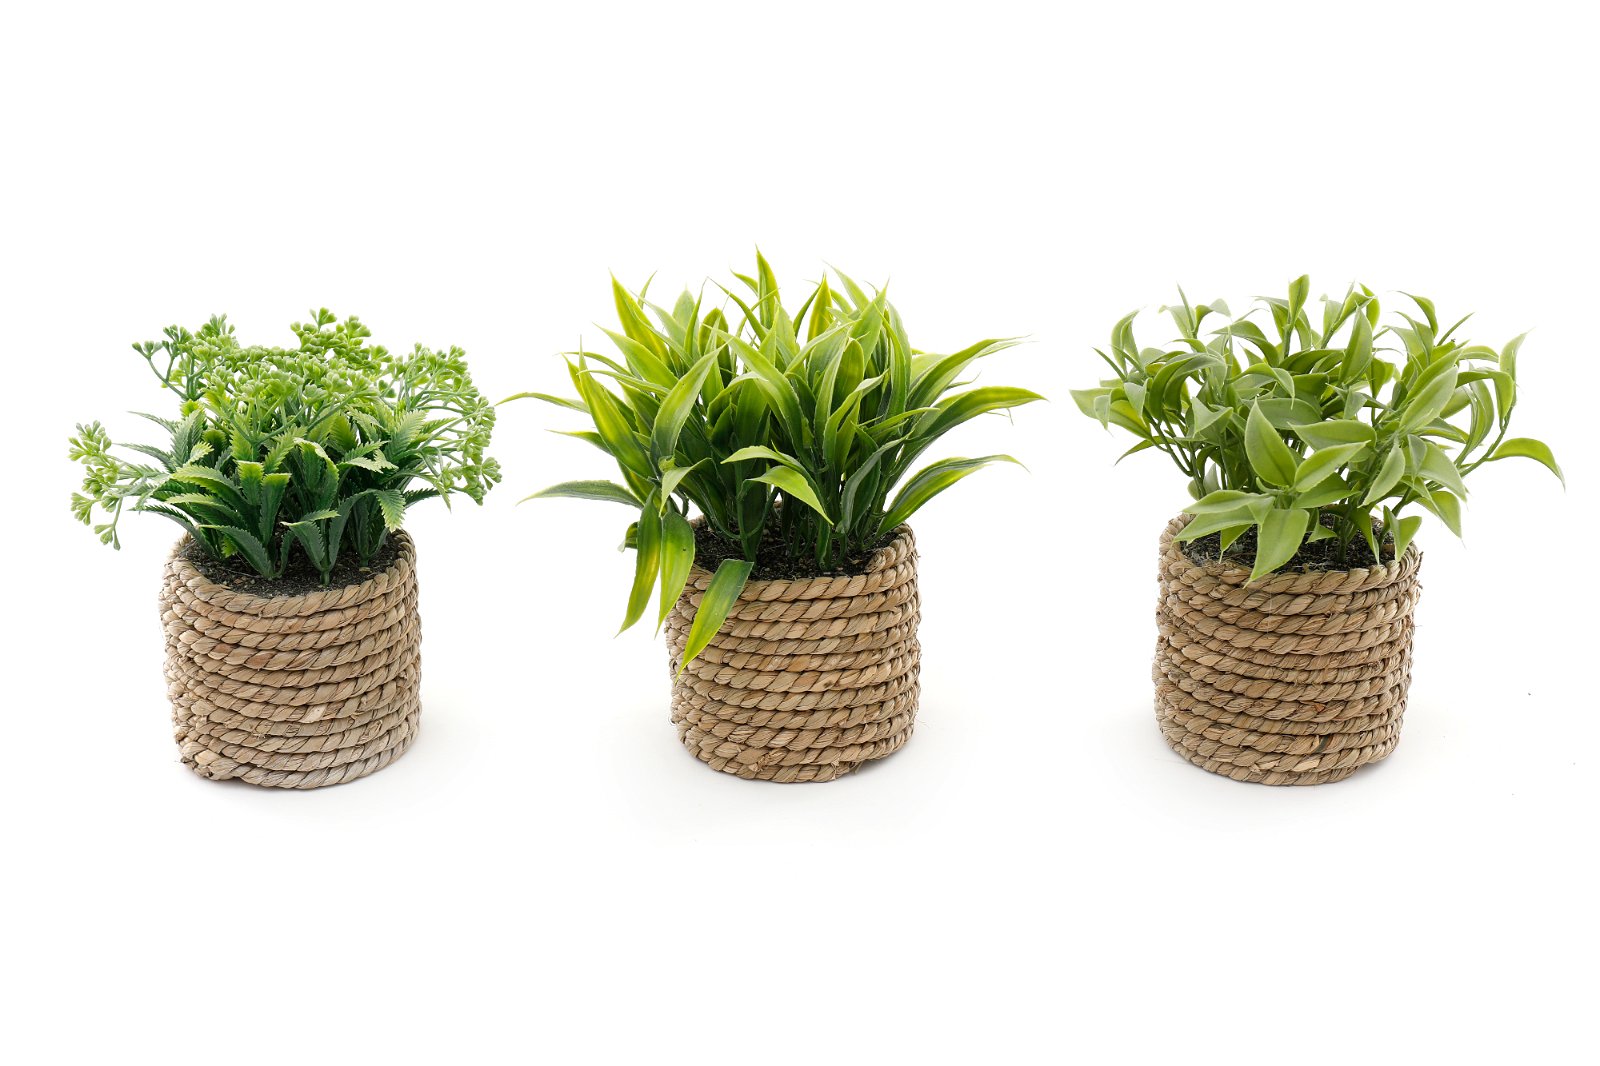 Three pots made of rope shown with green artificial succulents inside